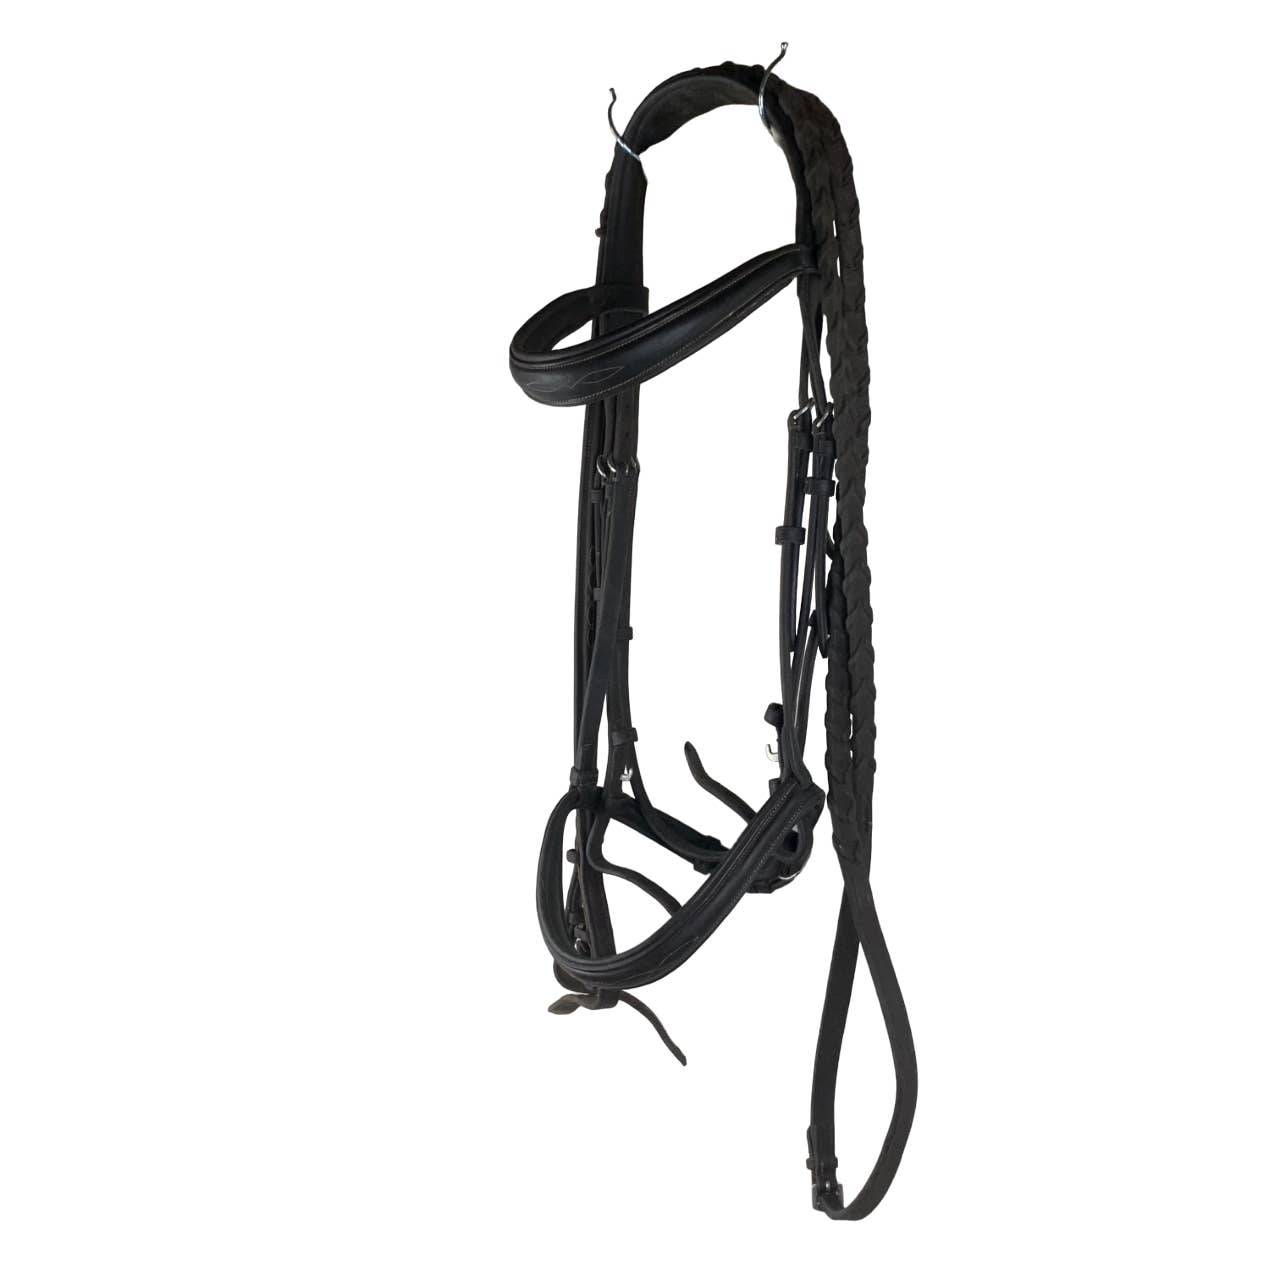 Ovation Fancy Bridle and Reins in Brown - Oversized